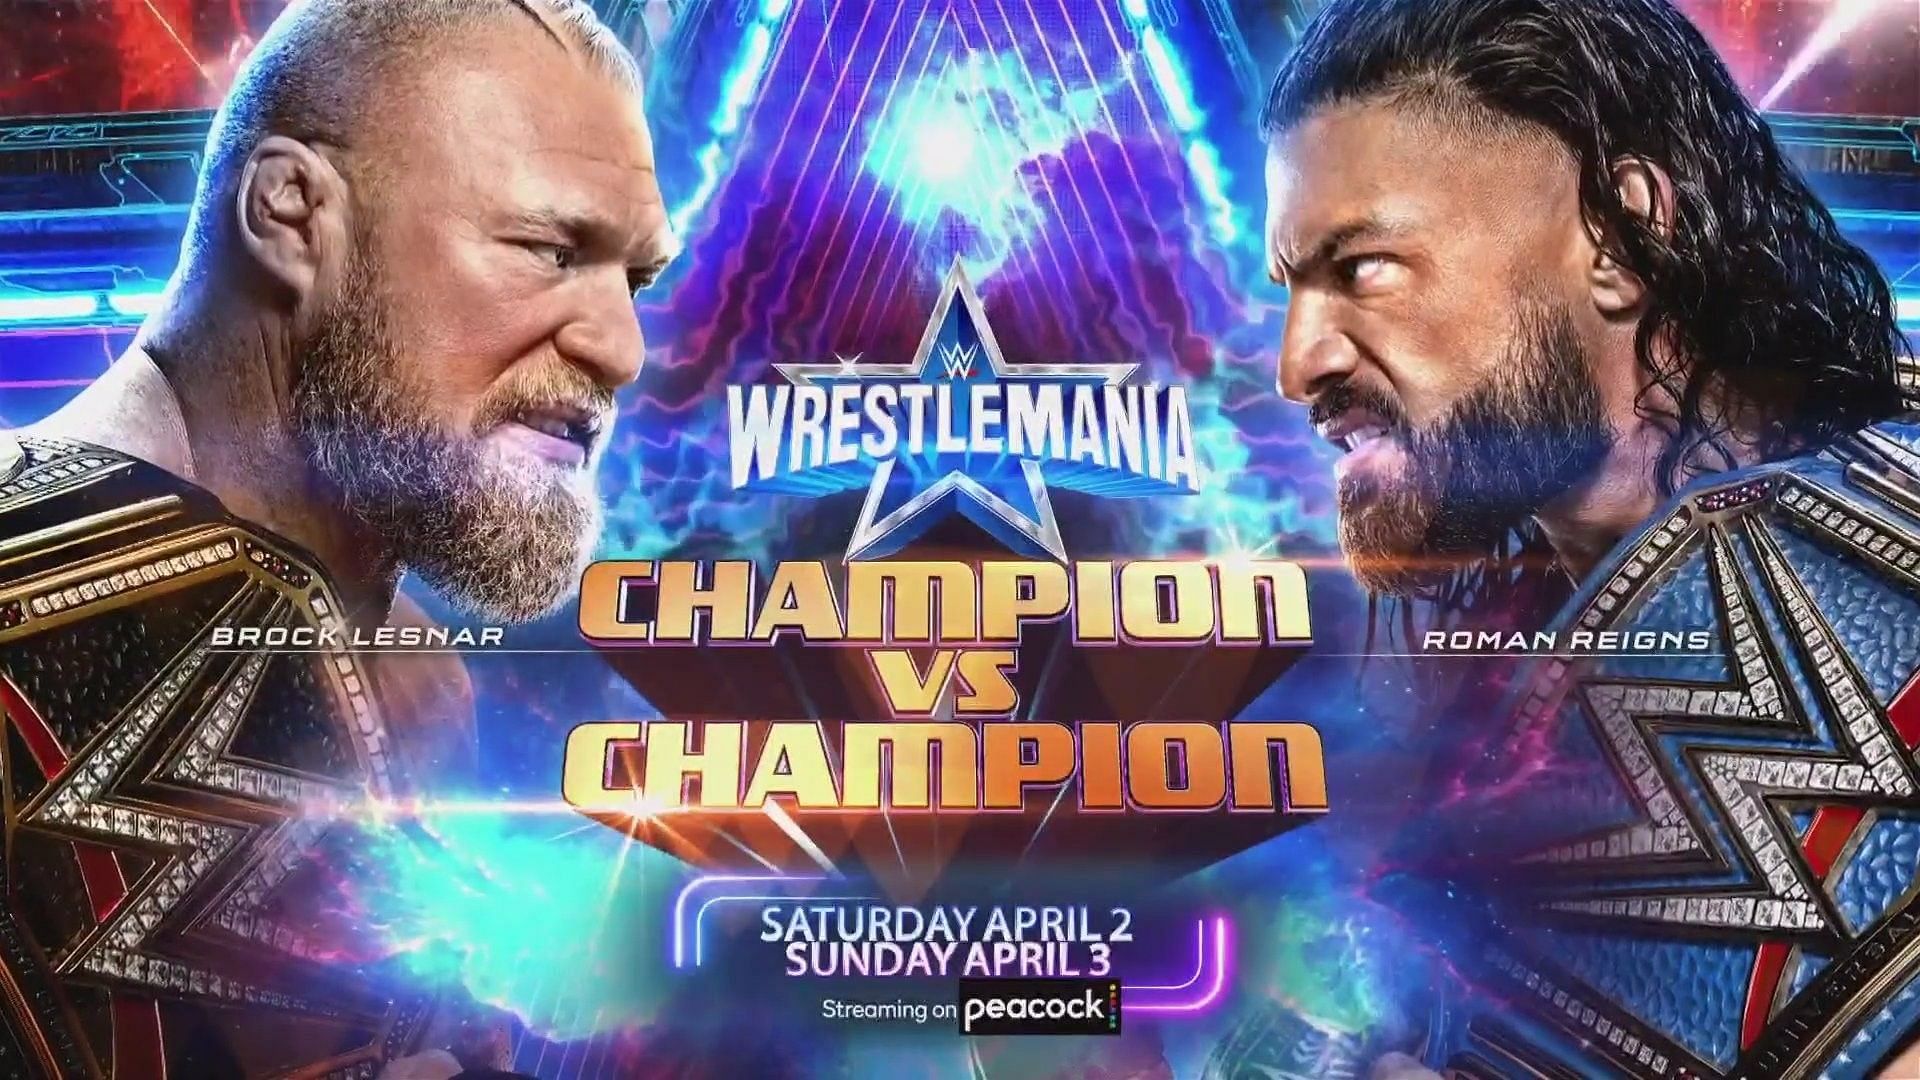 Who will be the Undisputed Champion after WrestleMania?